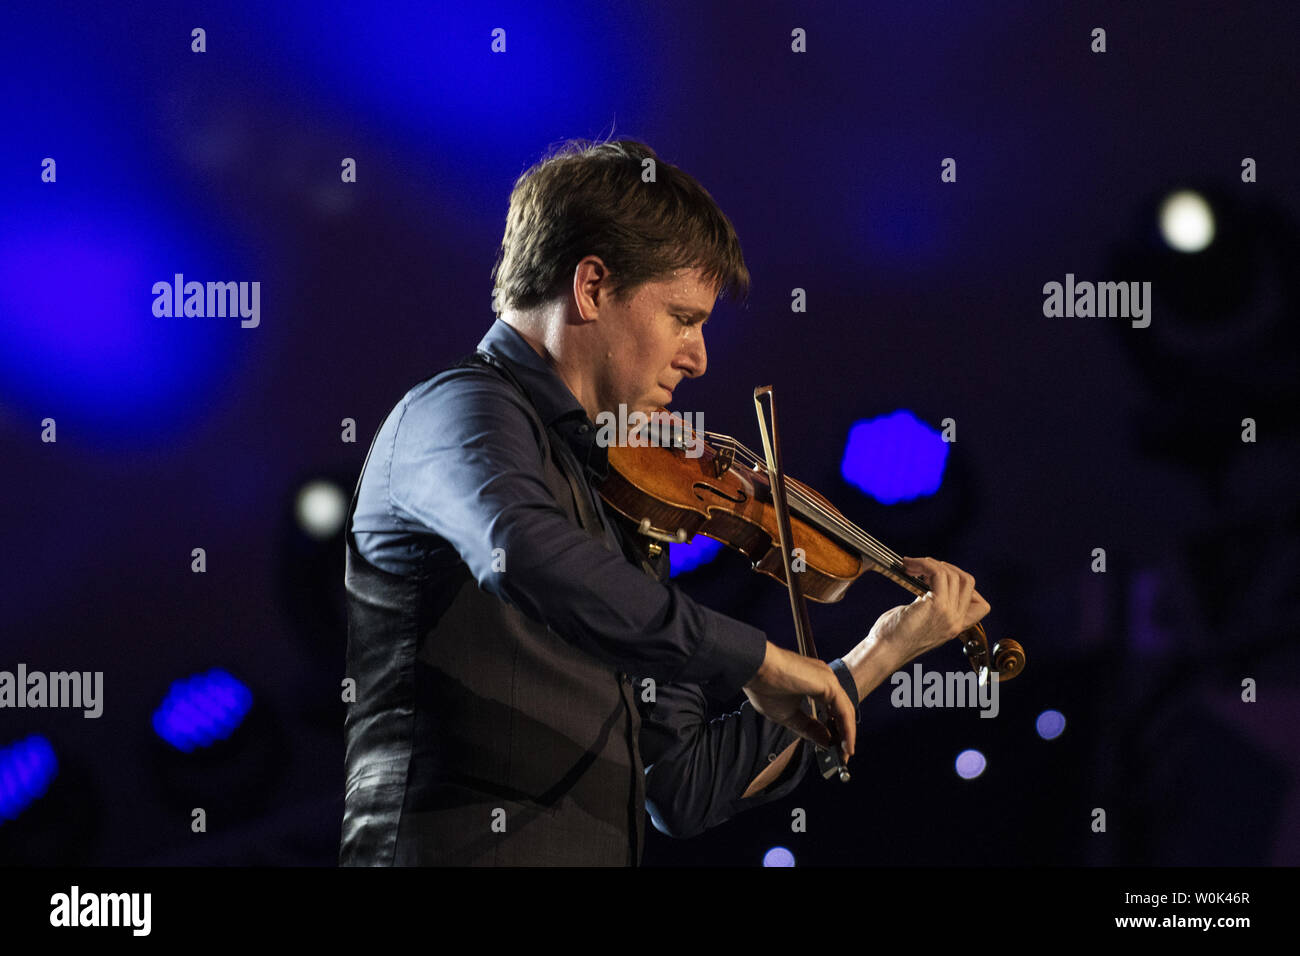 Violinist Joshua Bell performs a West Side Story song during a dress rehearsal for the Capitol Fourth concert in Washington, DC on July 3, 2018.  The annual PBS TV show will be performed live with fireworks during the Fourth of July celebrations in the nation's capital on July 4, 2018.   Photo by Pat Benic Stock Photo